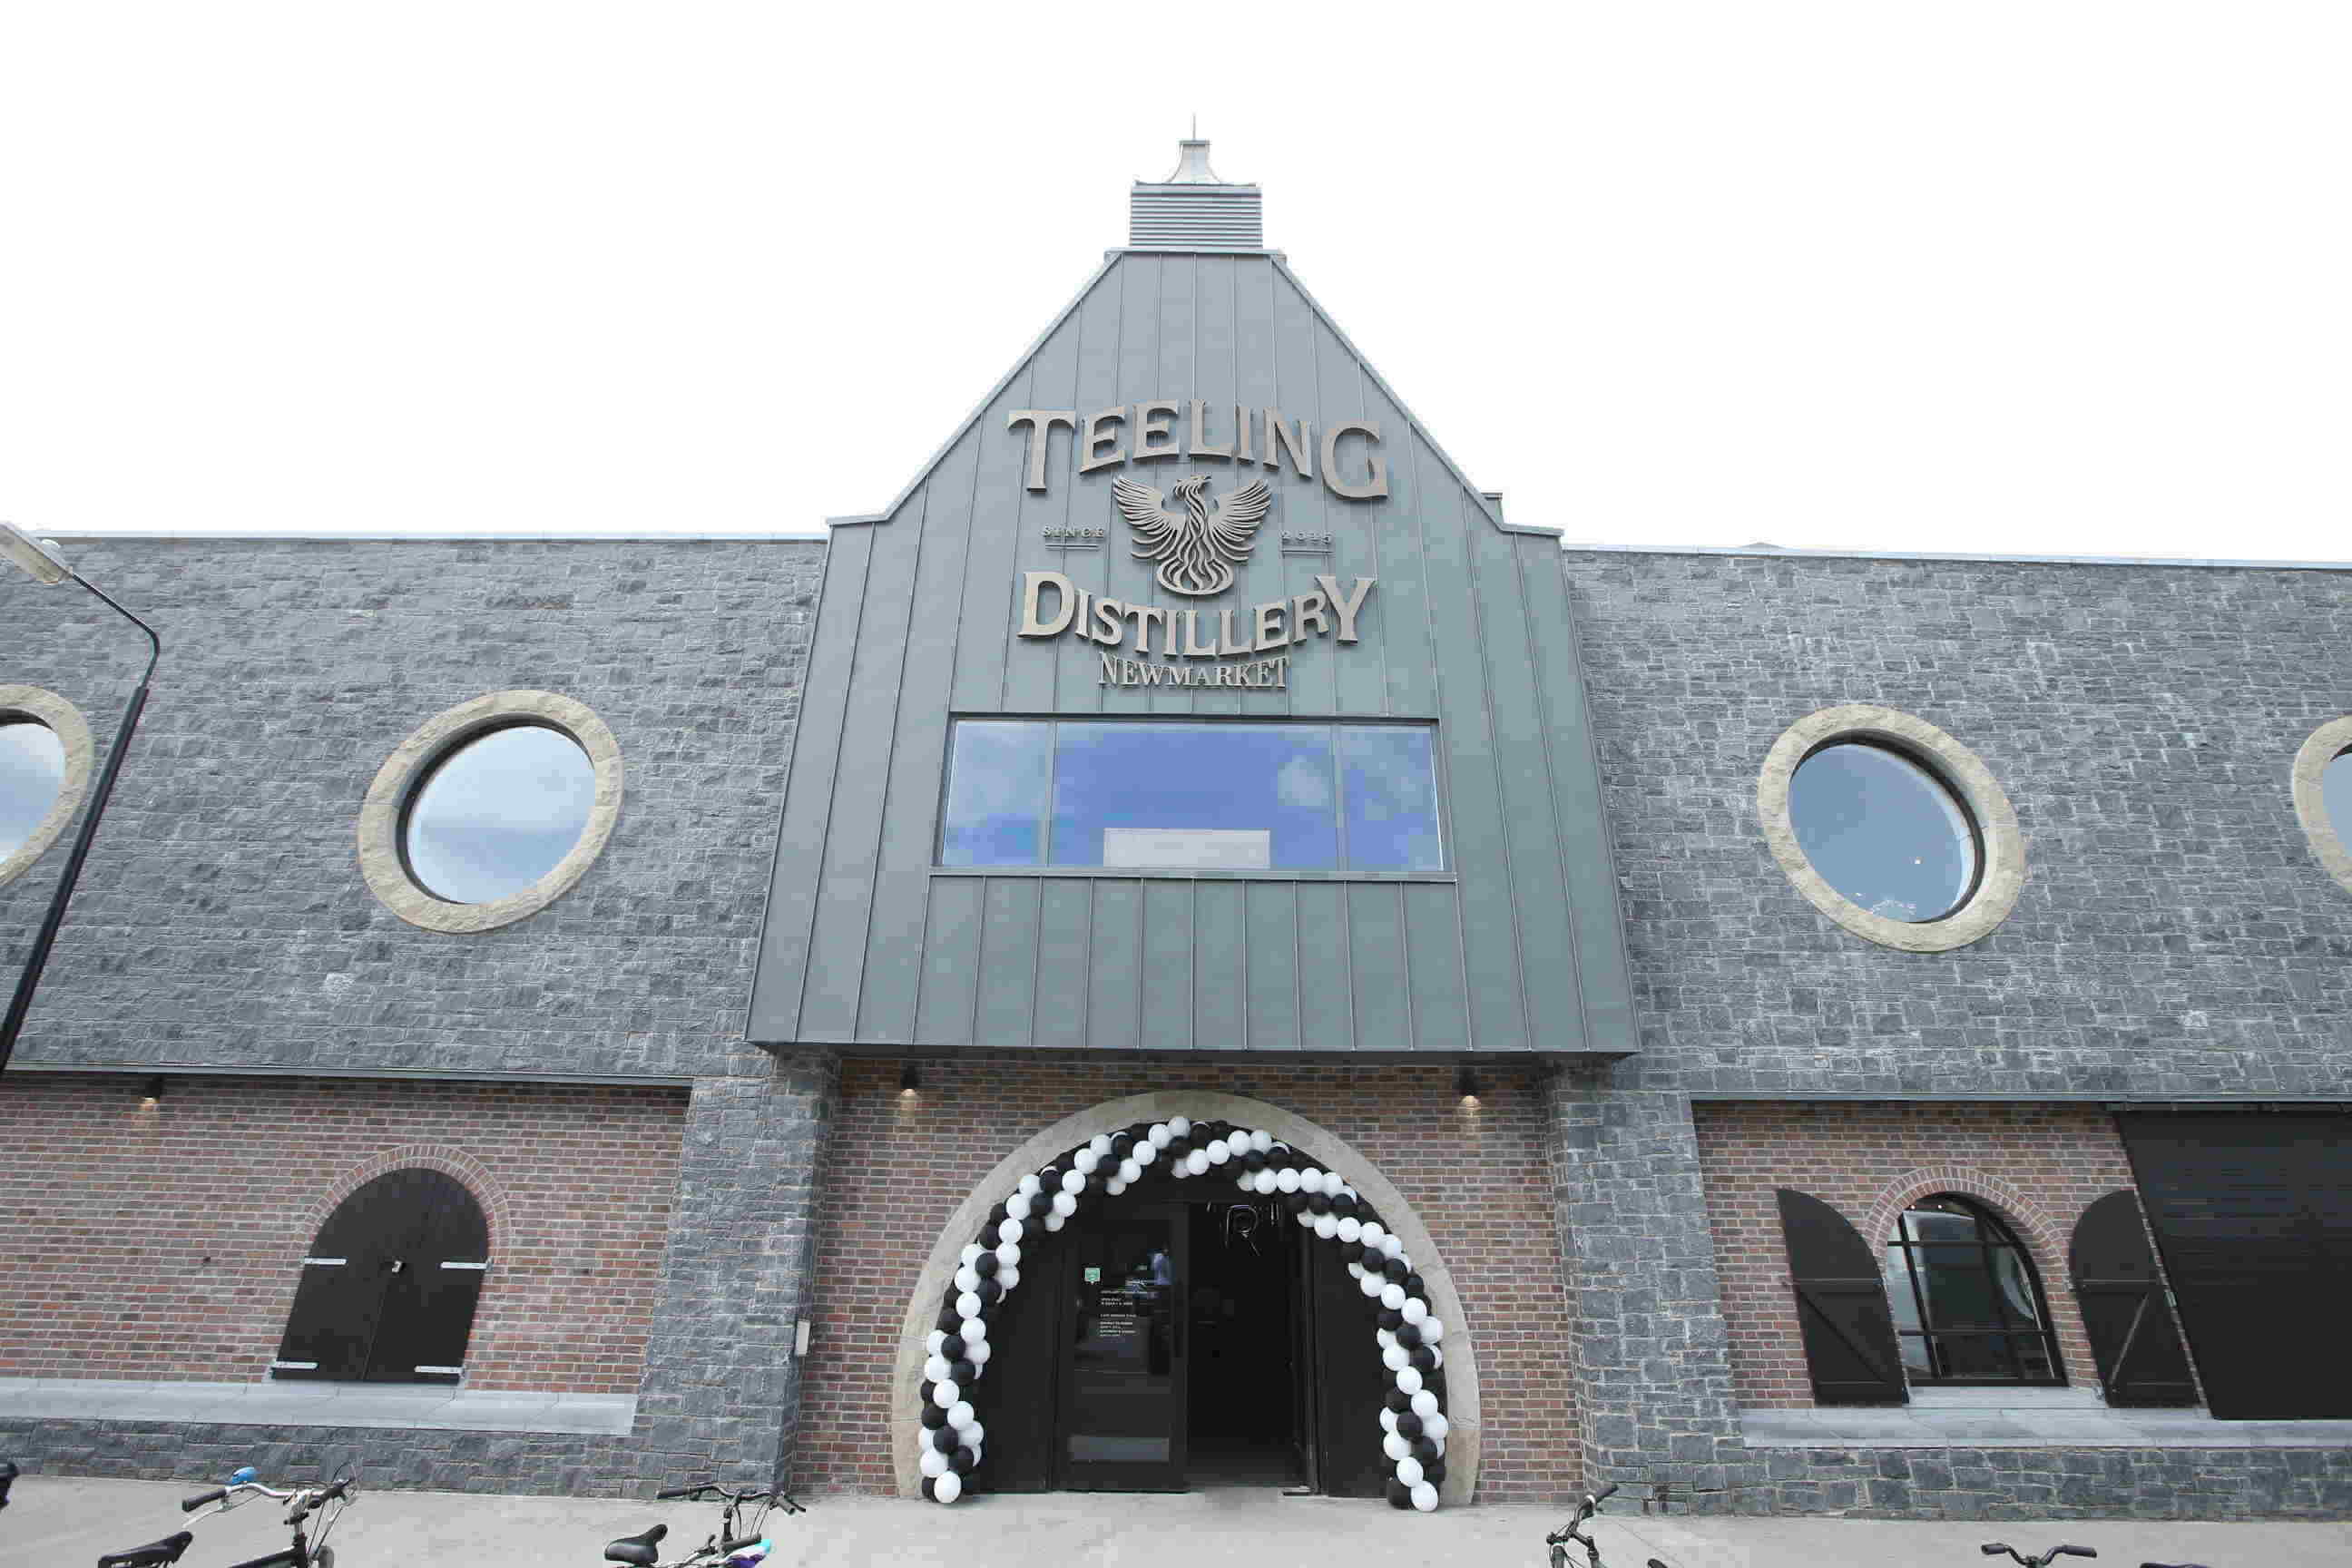 Based in Newmarket, Dublin 8, the Teeling Whiskey Distillery opened its doors in June 2015, heralding the revival of distilling in the City as the first new distillery in Dublin in over 125 years.